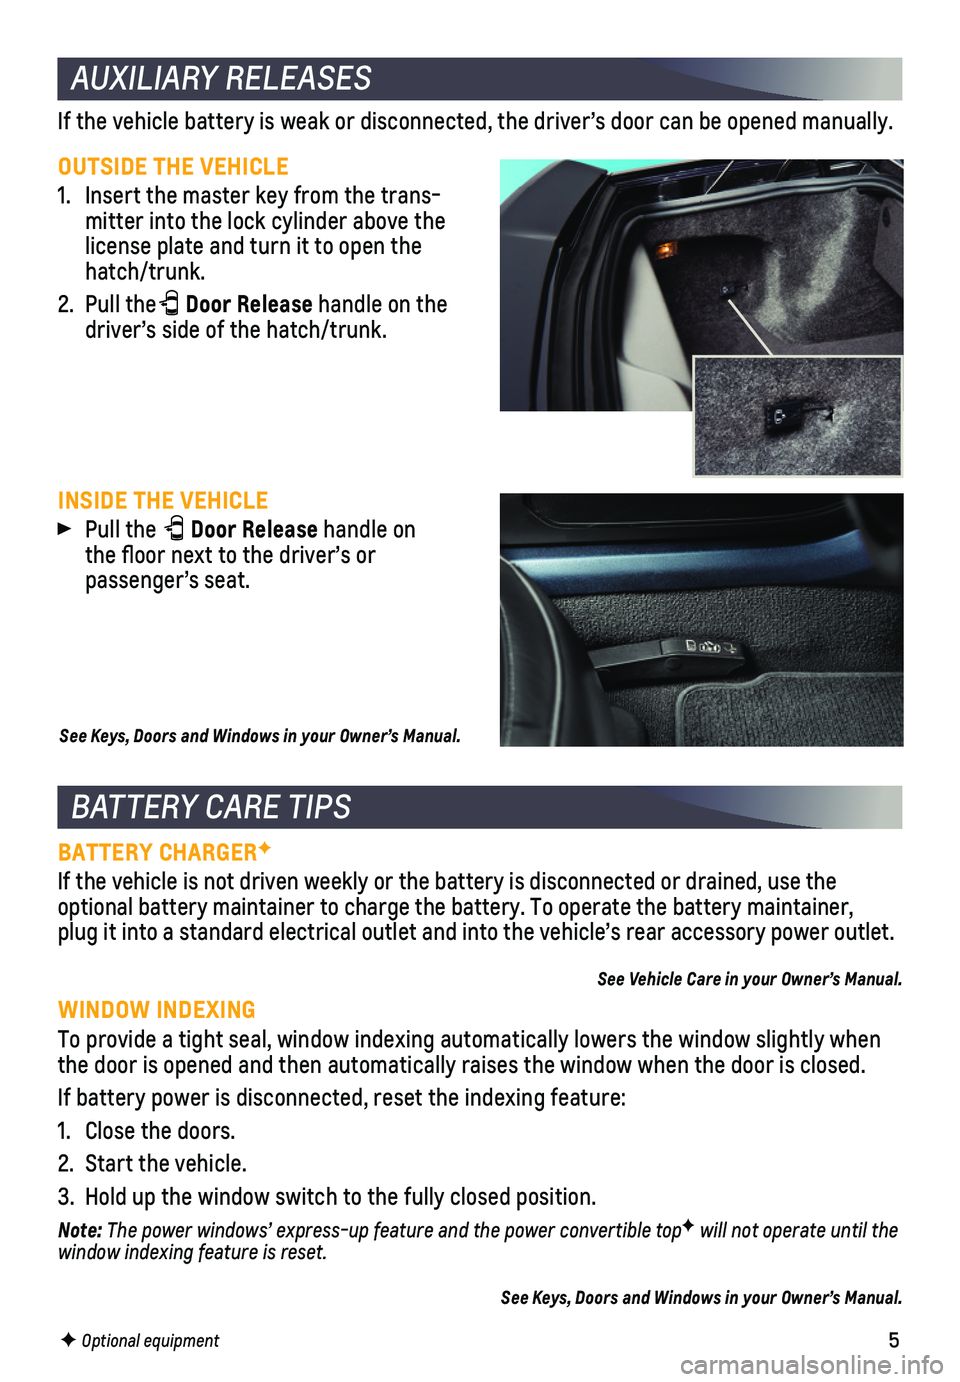 CHEVROLET CORVETTE 2019  Get To Know Guide 5
AUXILIARY RELEASES
OUTSIDE THE VEHICLE
1. Insert the master key from the trans-mitter into the lock   cylinder above the license plate and turn it to open the hatch/trunk.
2. Pull the Door Release h